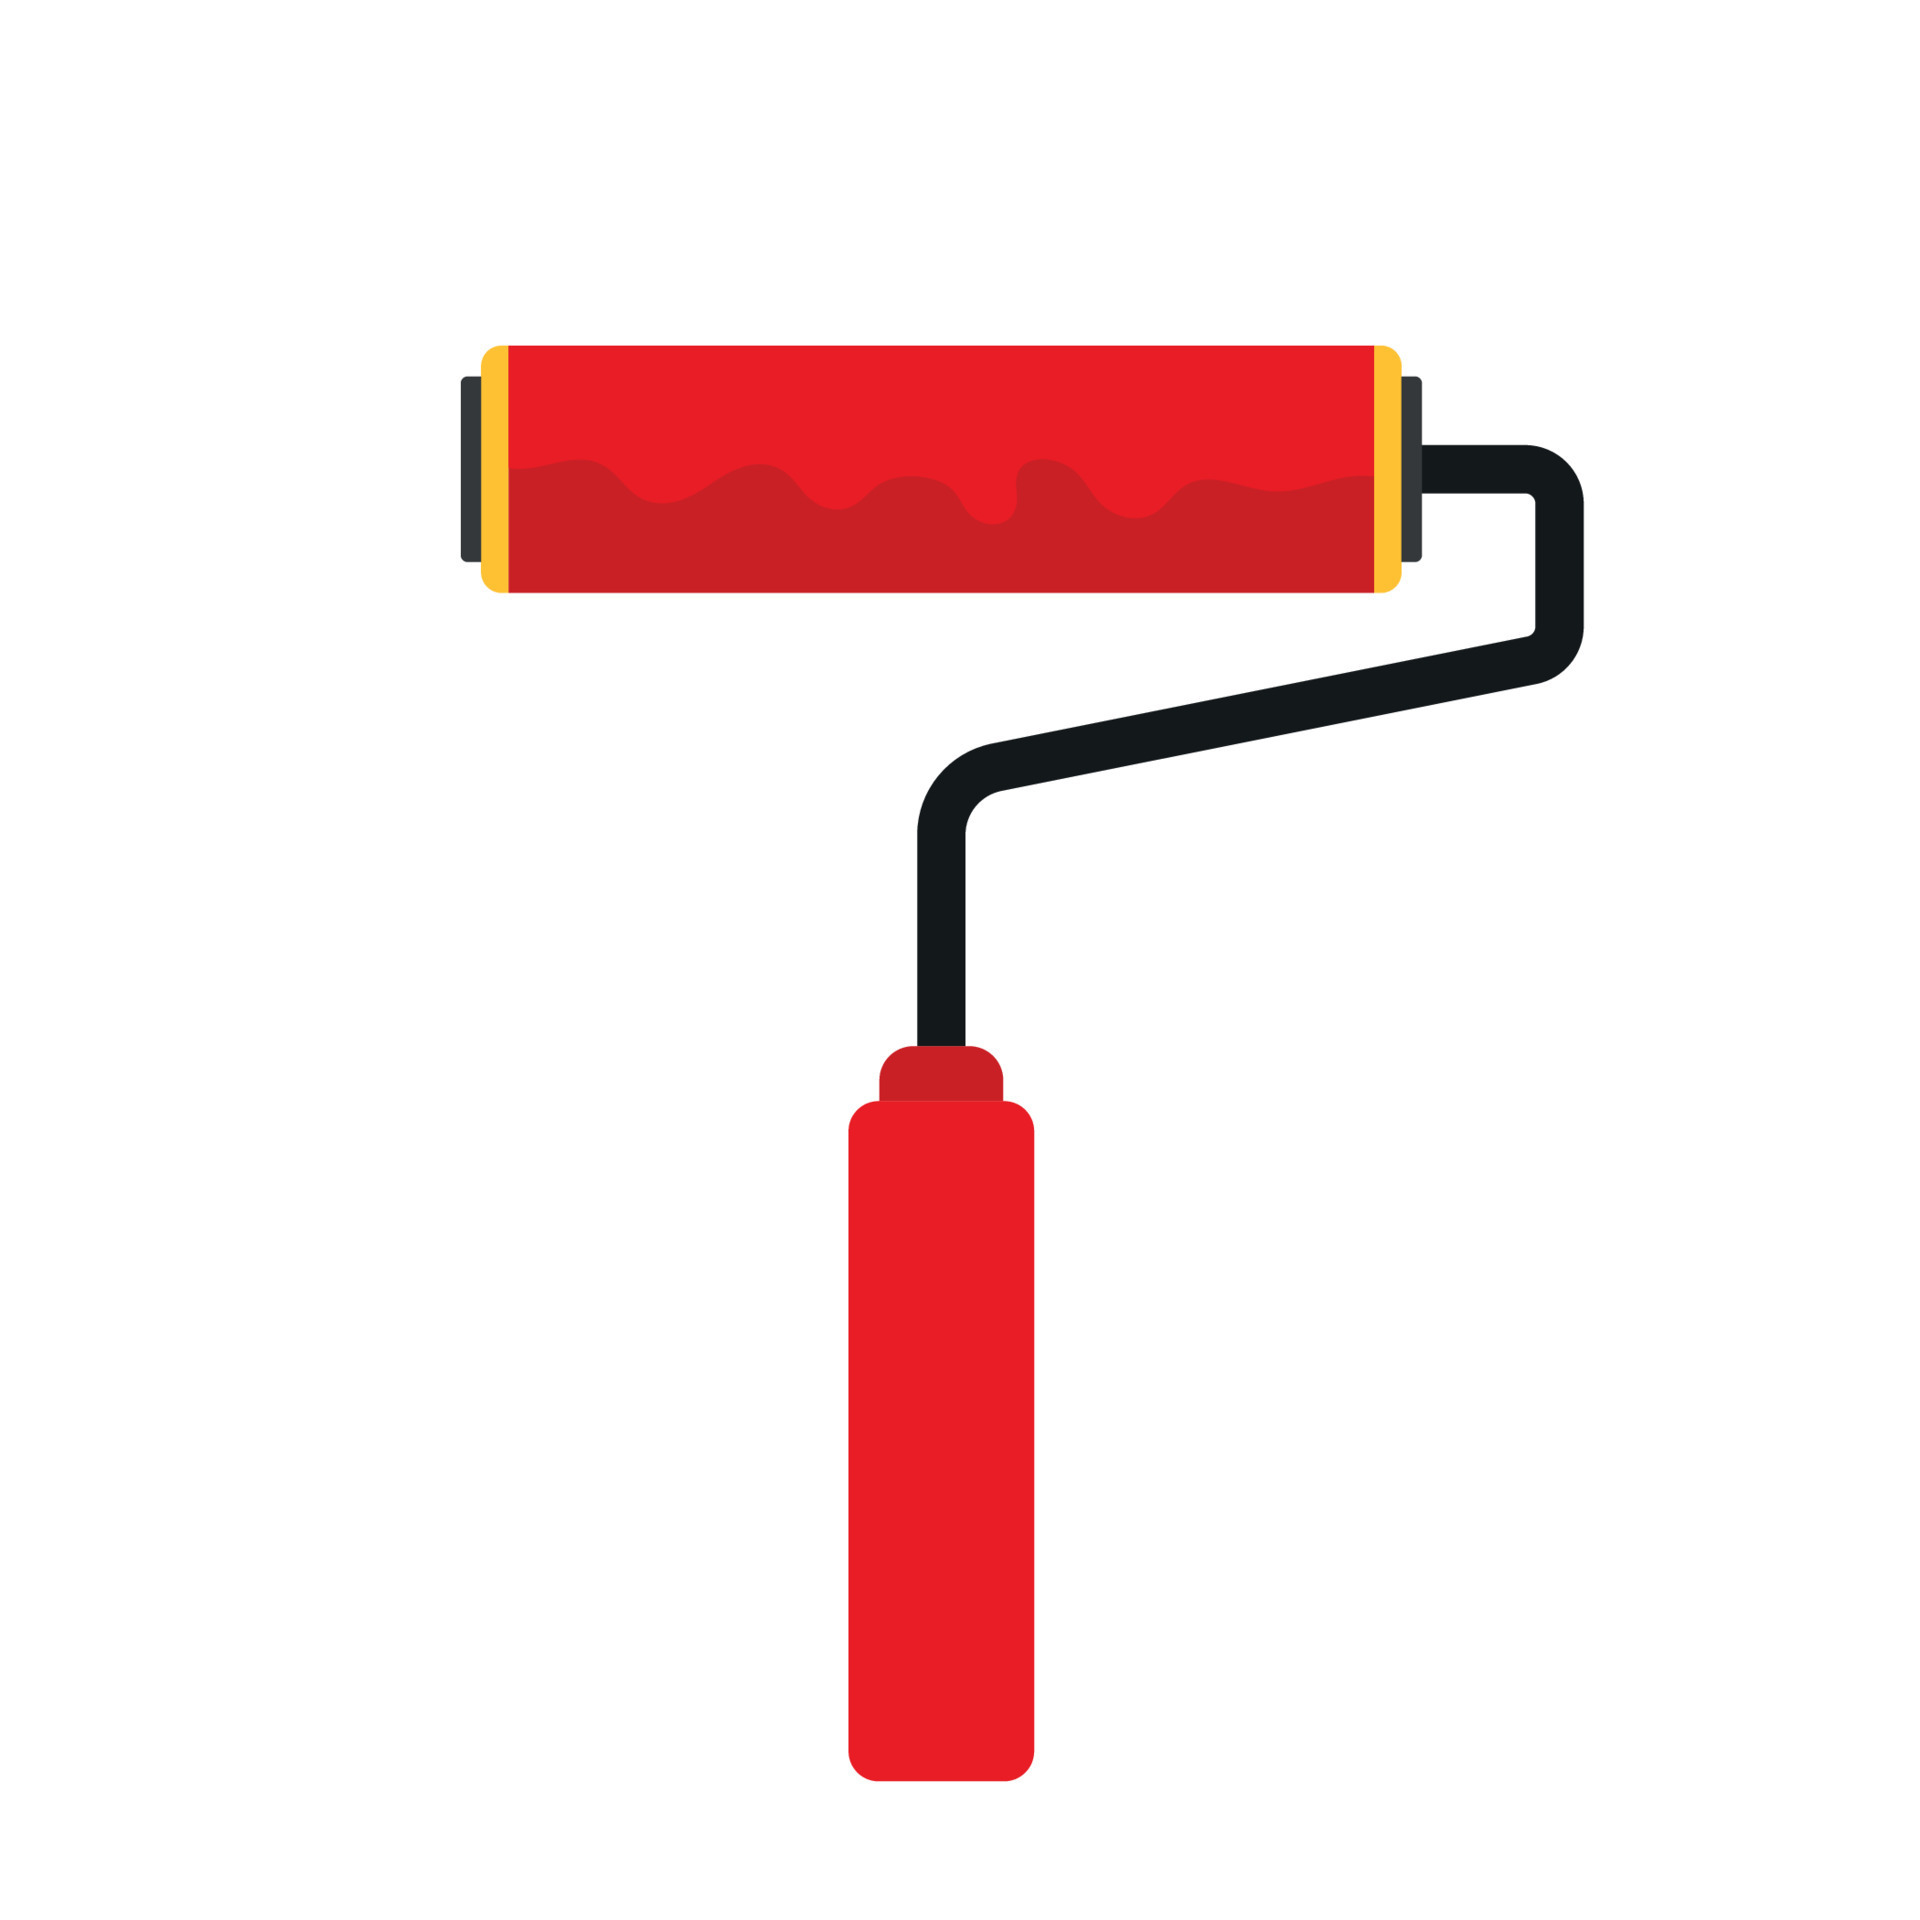 Animated Paint Roller Icon Clipart Vector Illustration Isolated on